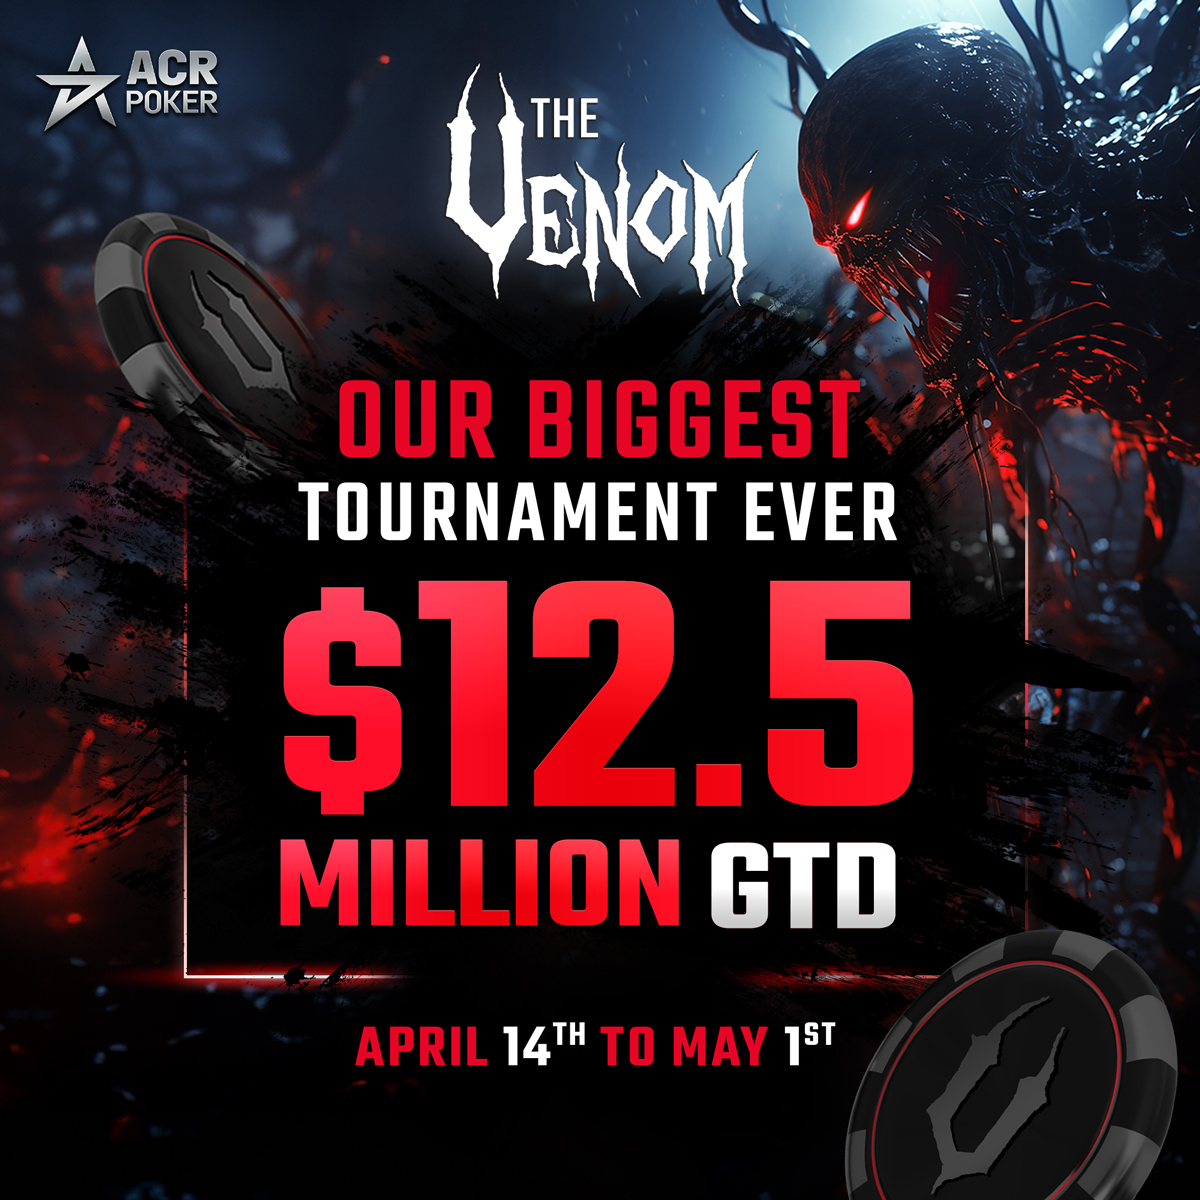 Get ready for Day 1D of the $12.5M GTD #Venom, starting today at 1:05pm ET. 🔥 Each player starts with 300,000 chips, with blinds increasing every 20 minutes. Late registration is open all day.  You don’t want to miss our 5th Venom anniversary! 🚀